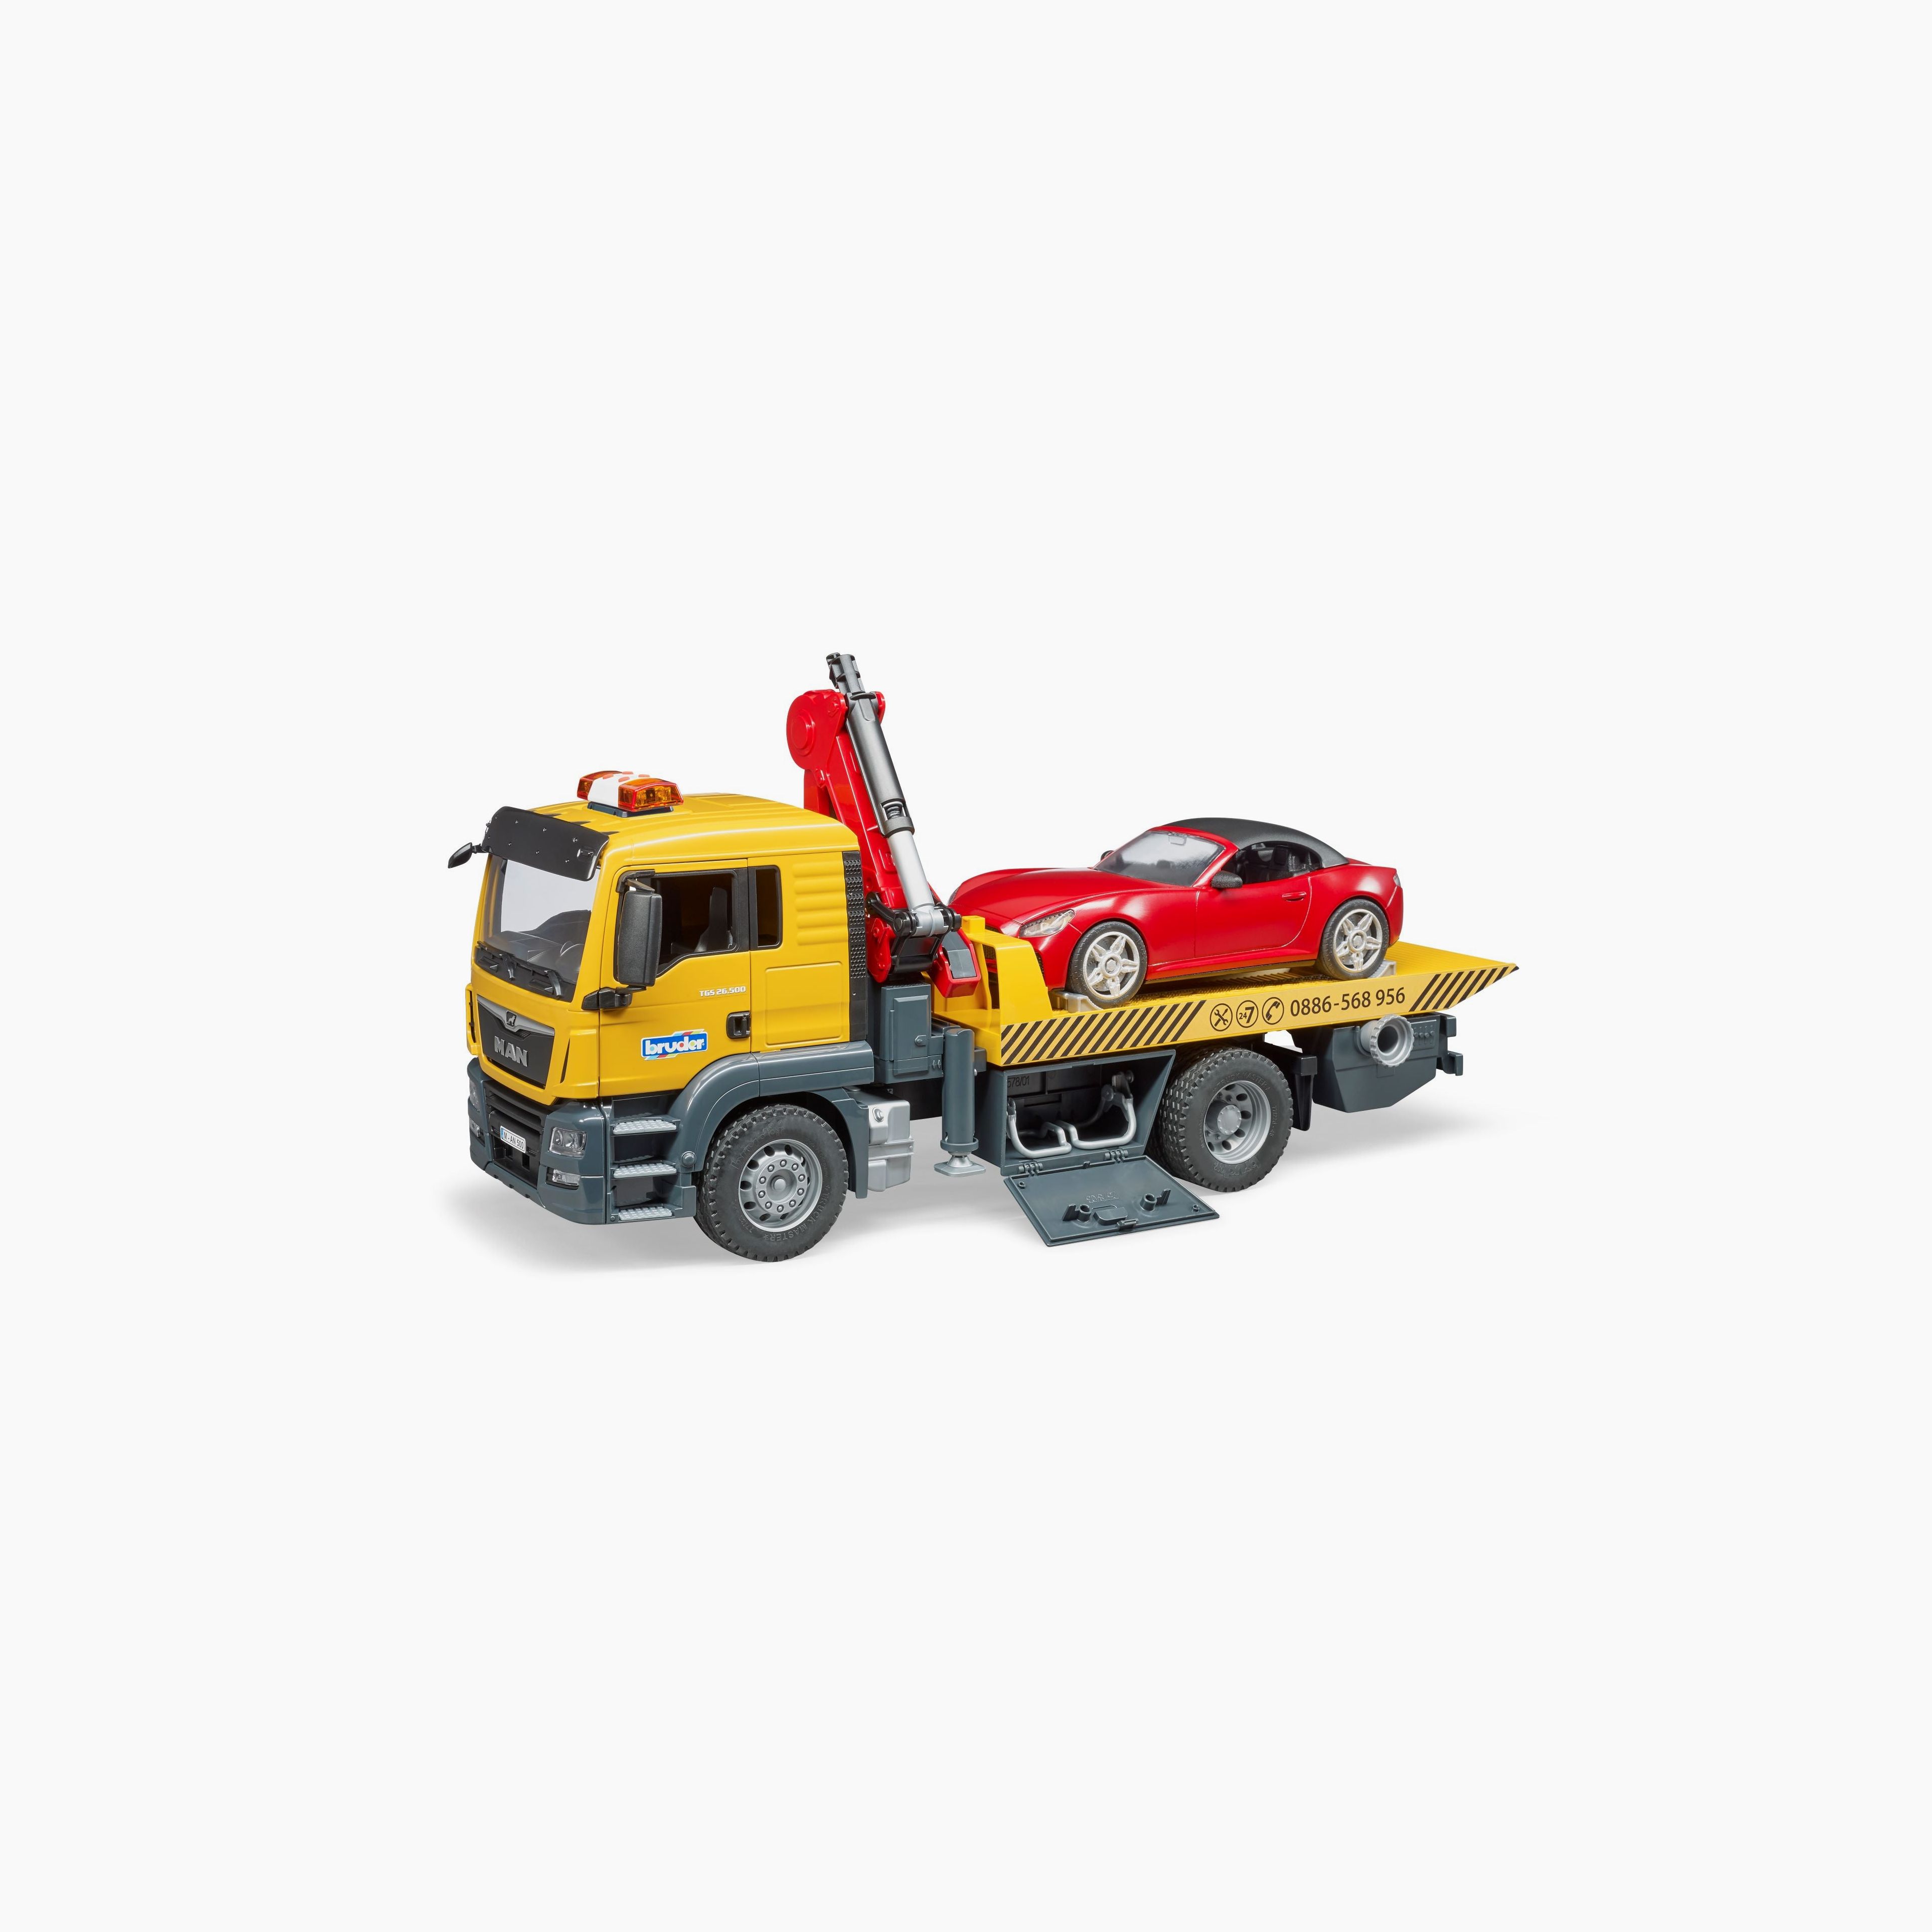 20% OFF! Bruder 03750 MAN TGS Tow Truck w/ Roadster 28.12.10